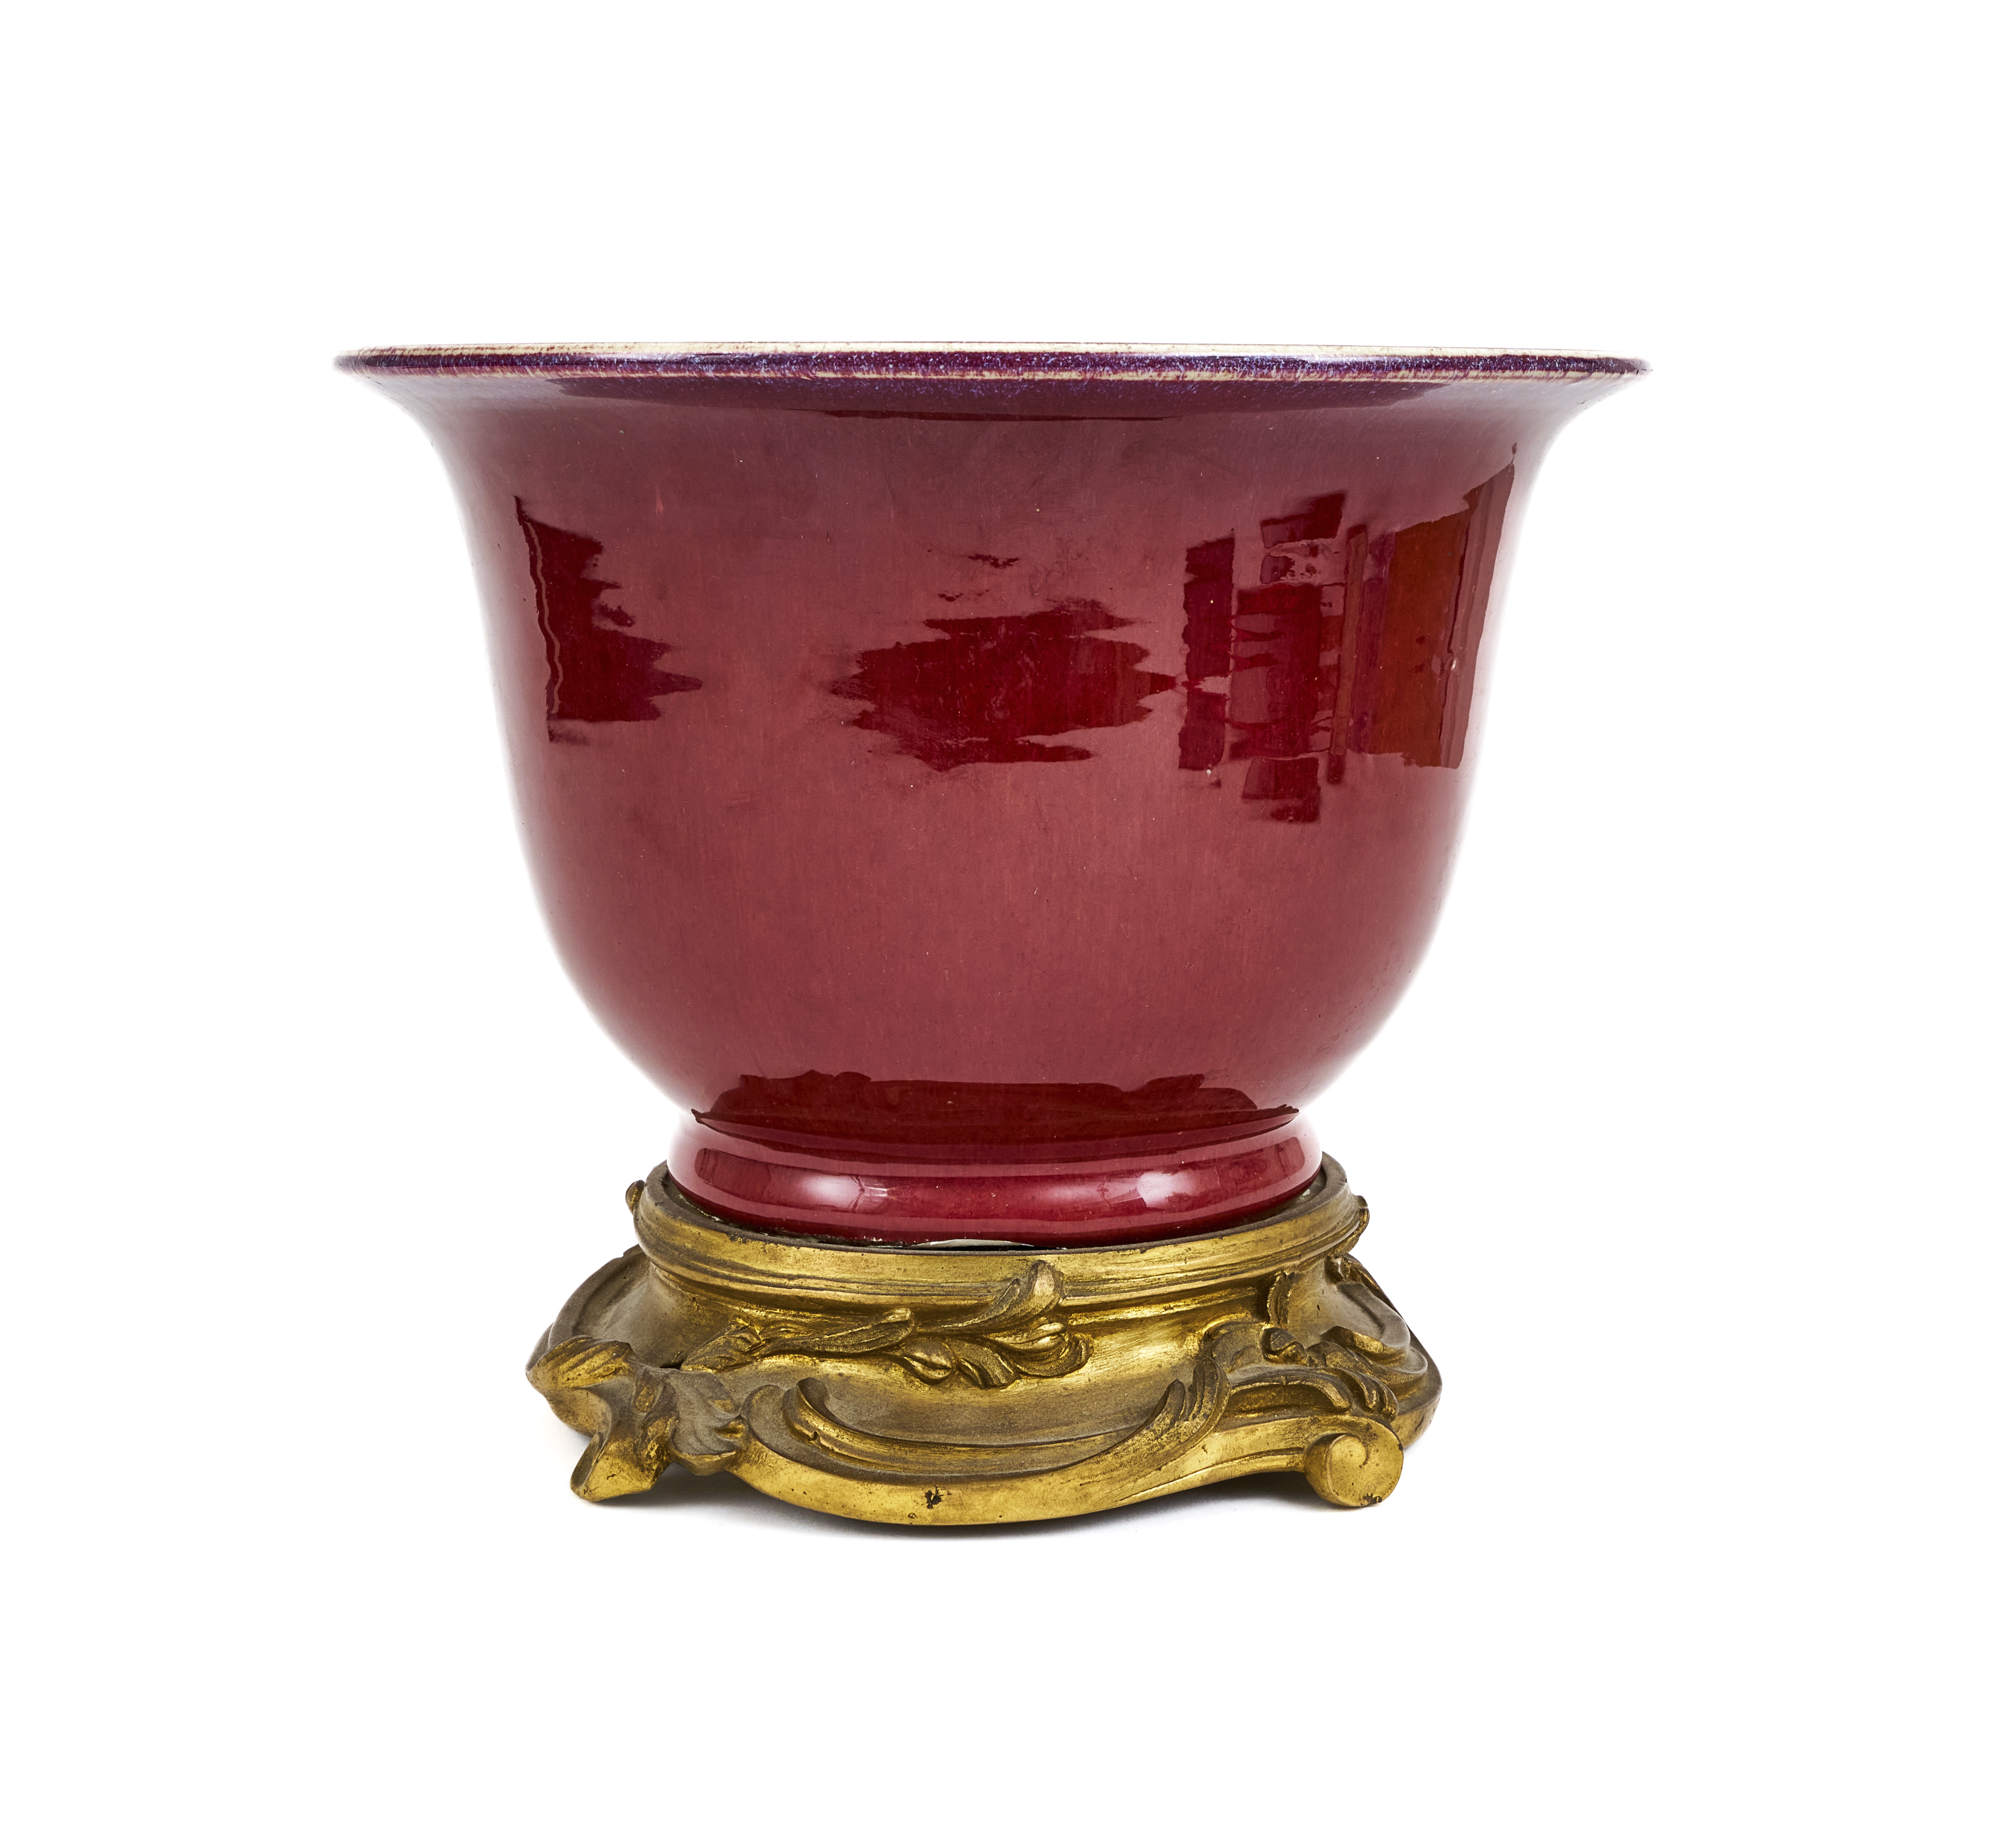 A LARGE CHINESE RED FLAMBE PLANTER ON FRENCH MOUNTS, QIANLONG PERIOD (1736-1795) - Image 2 of 4